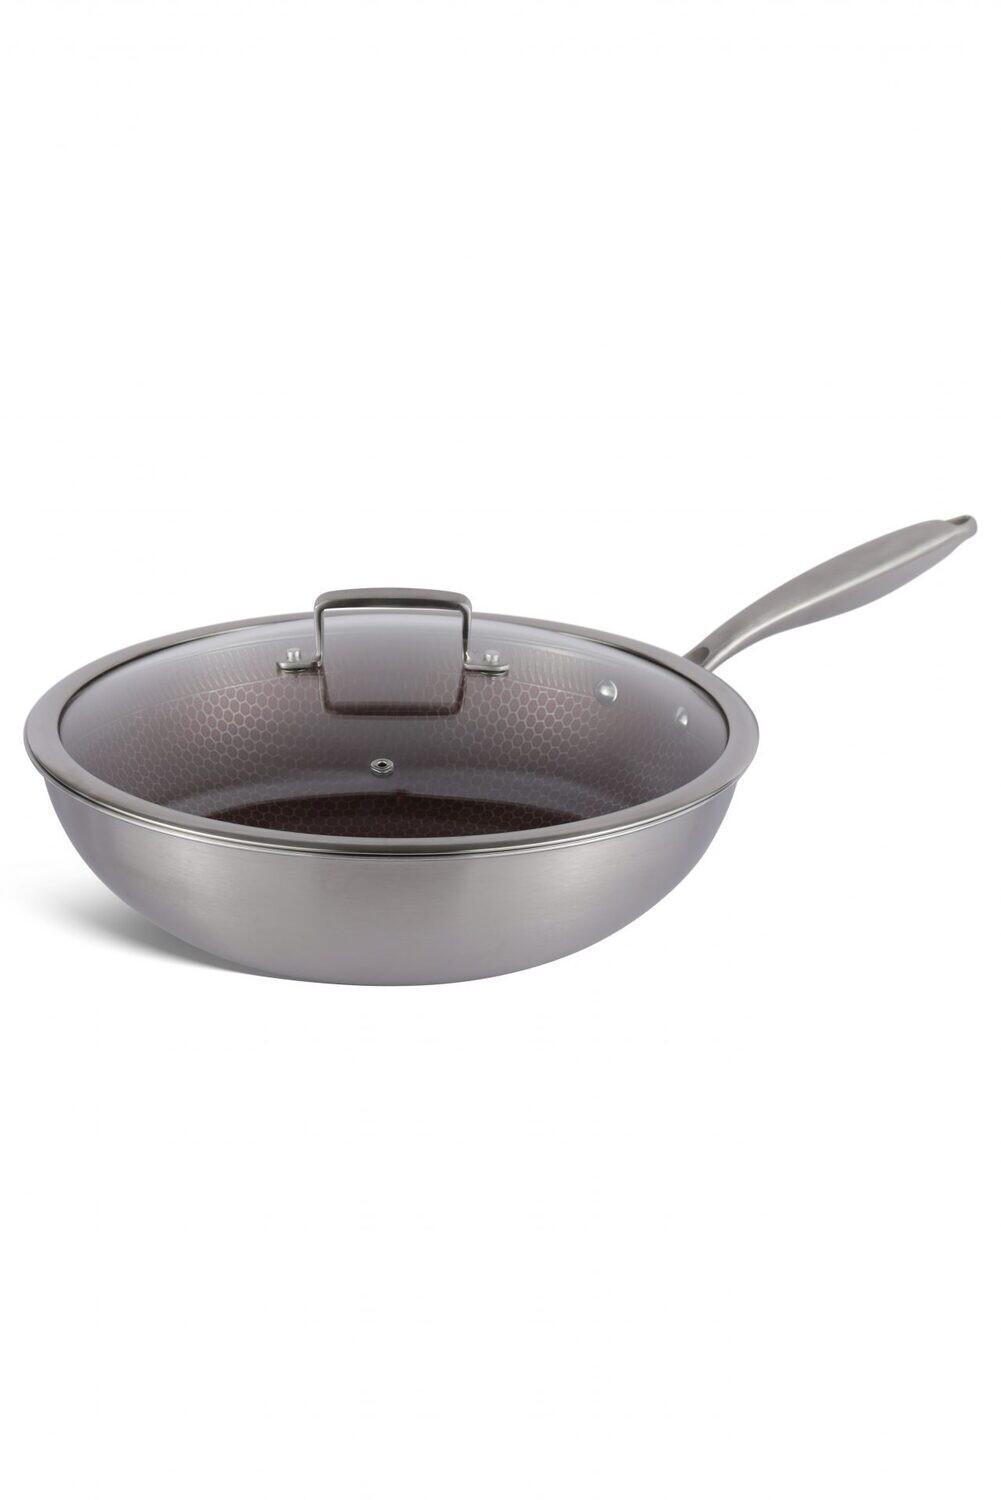 Edenberg Wok Pan 28cm Tri-Ply Stainless Steel induction friendly Cookware EB-14108